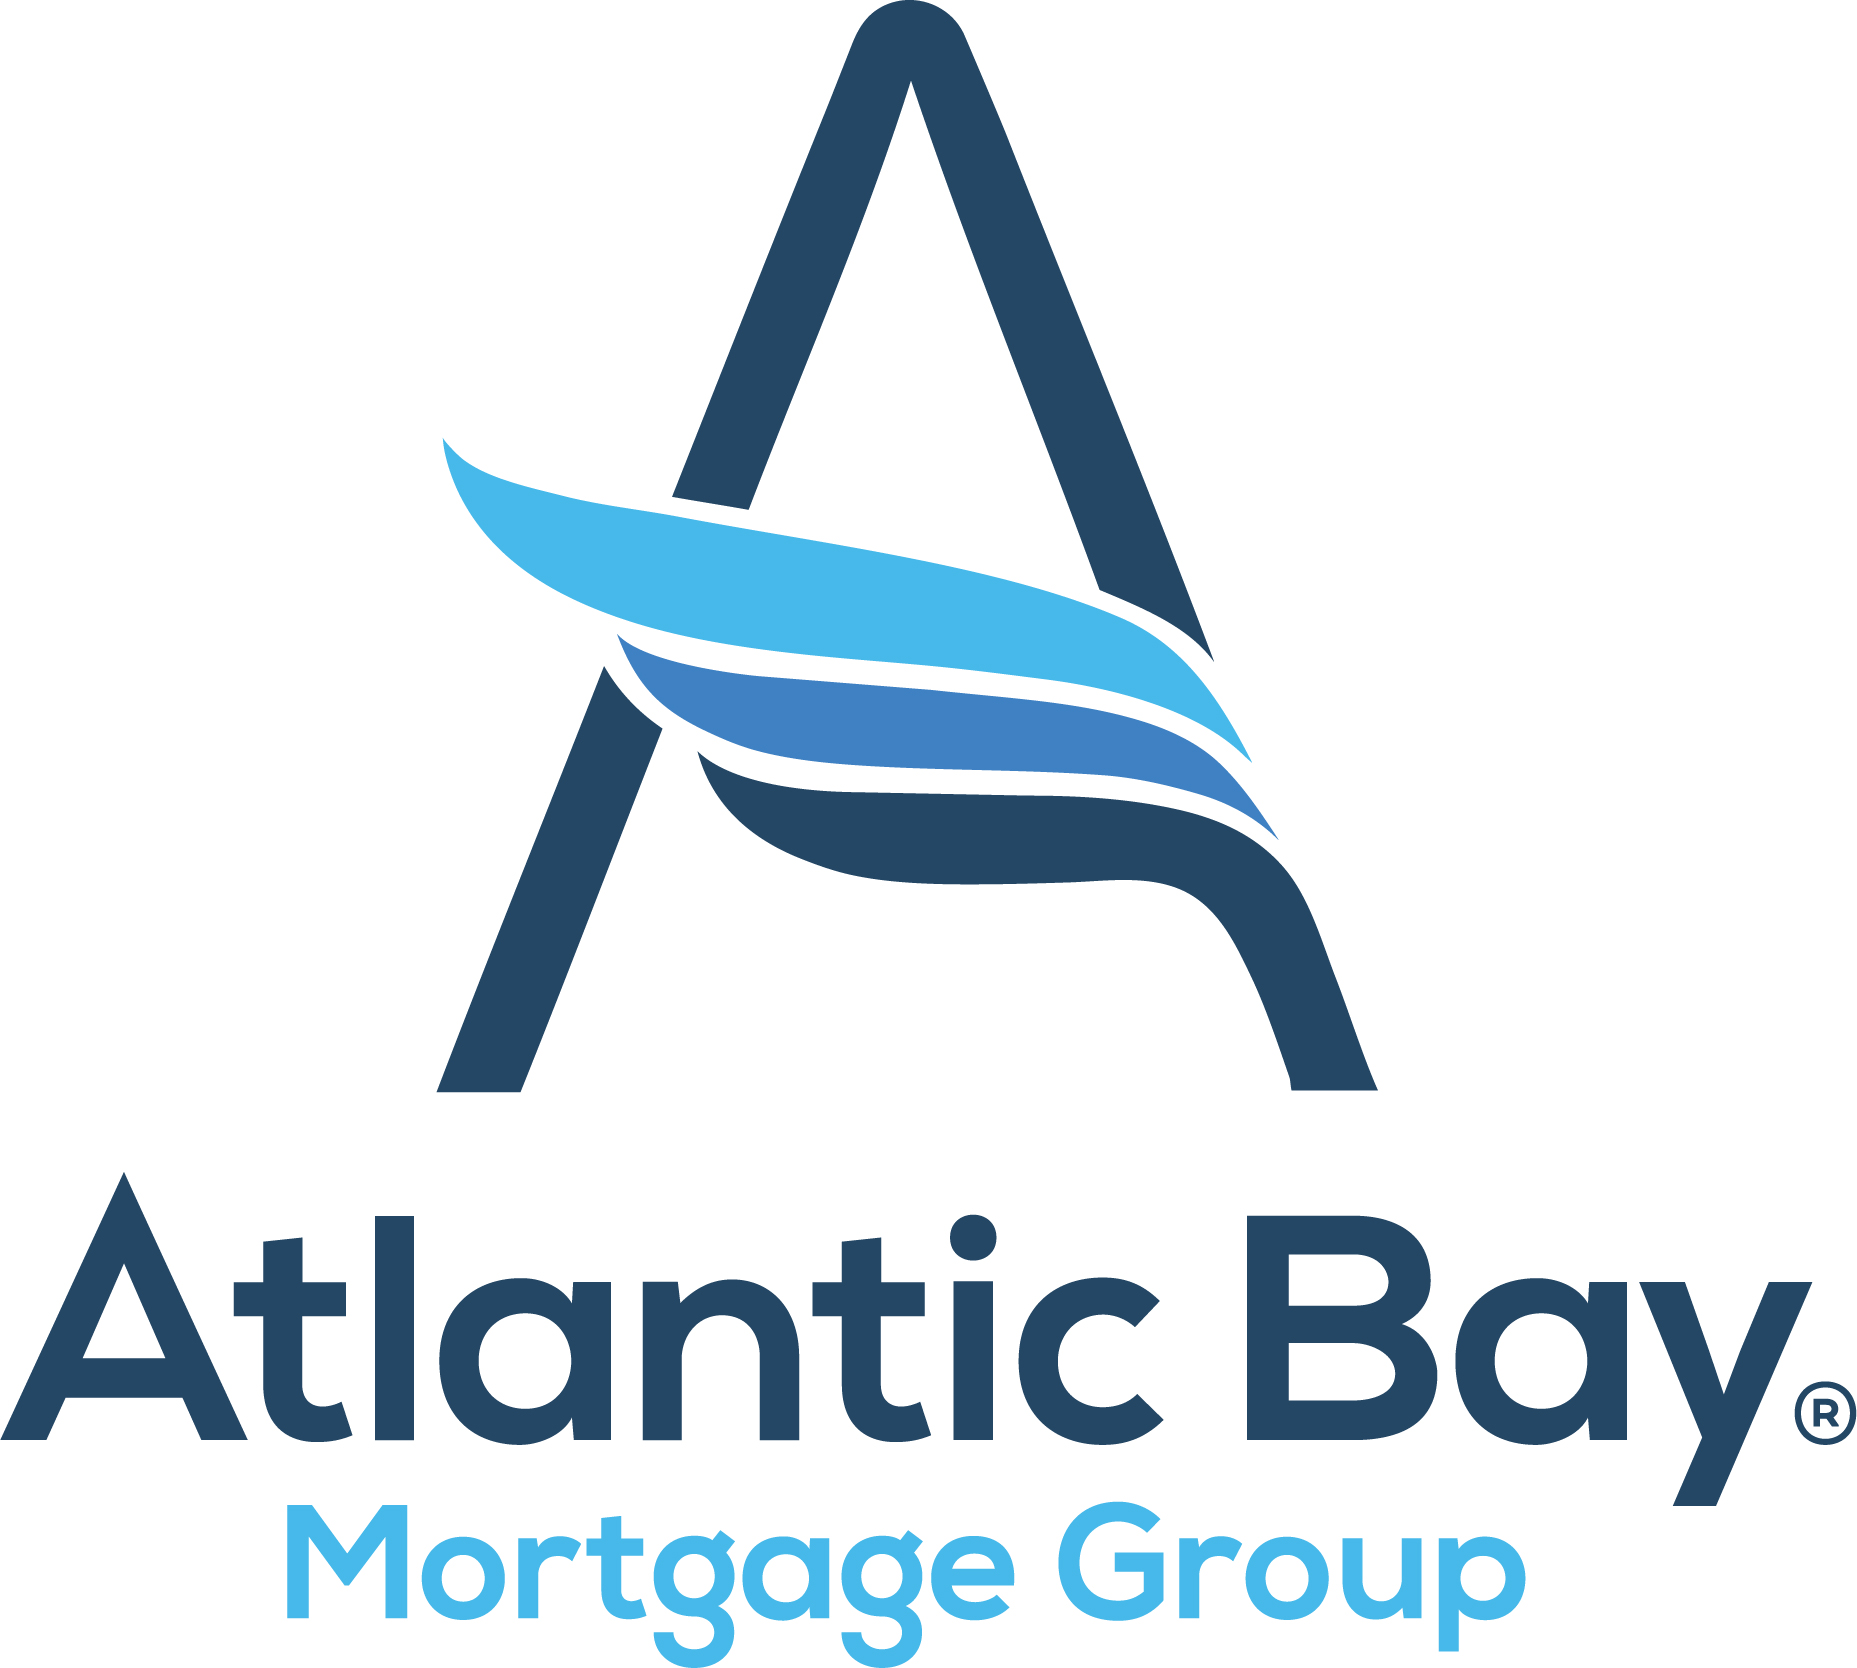 Atlantic Bay Mortgage Group has announced the celebration of two decades in business throughout 2017